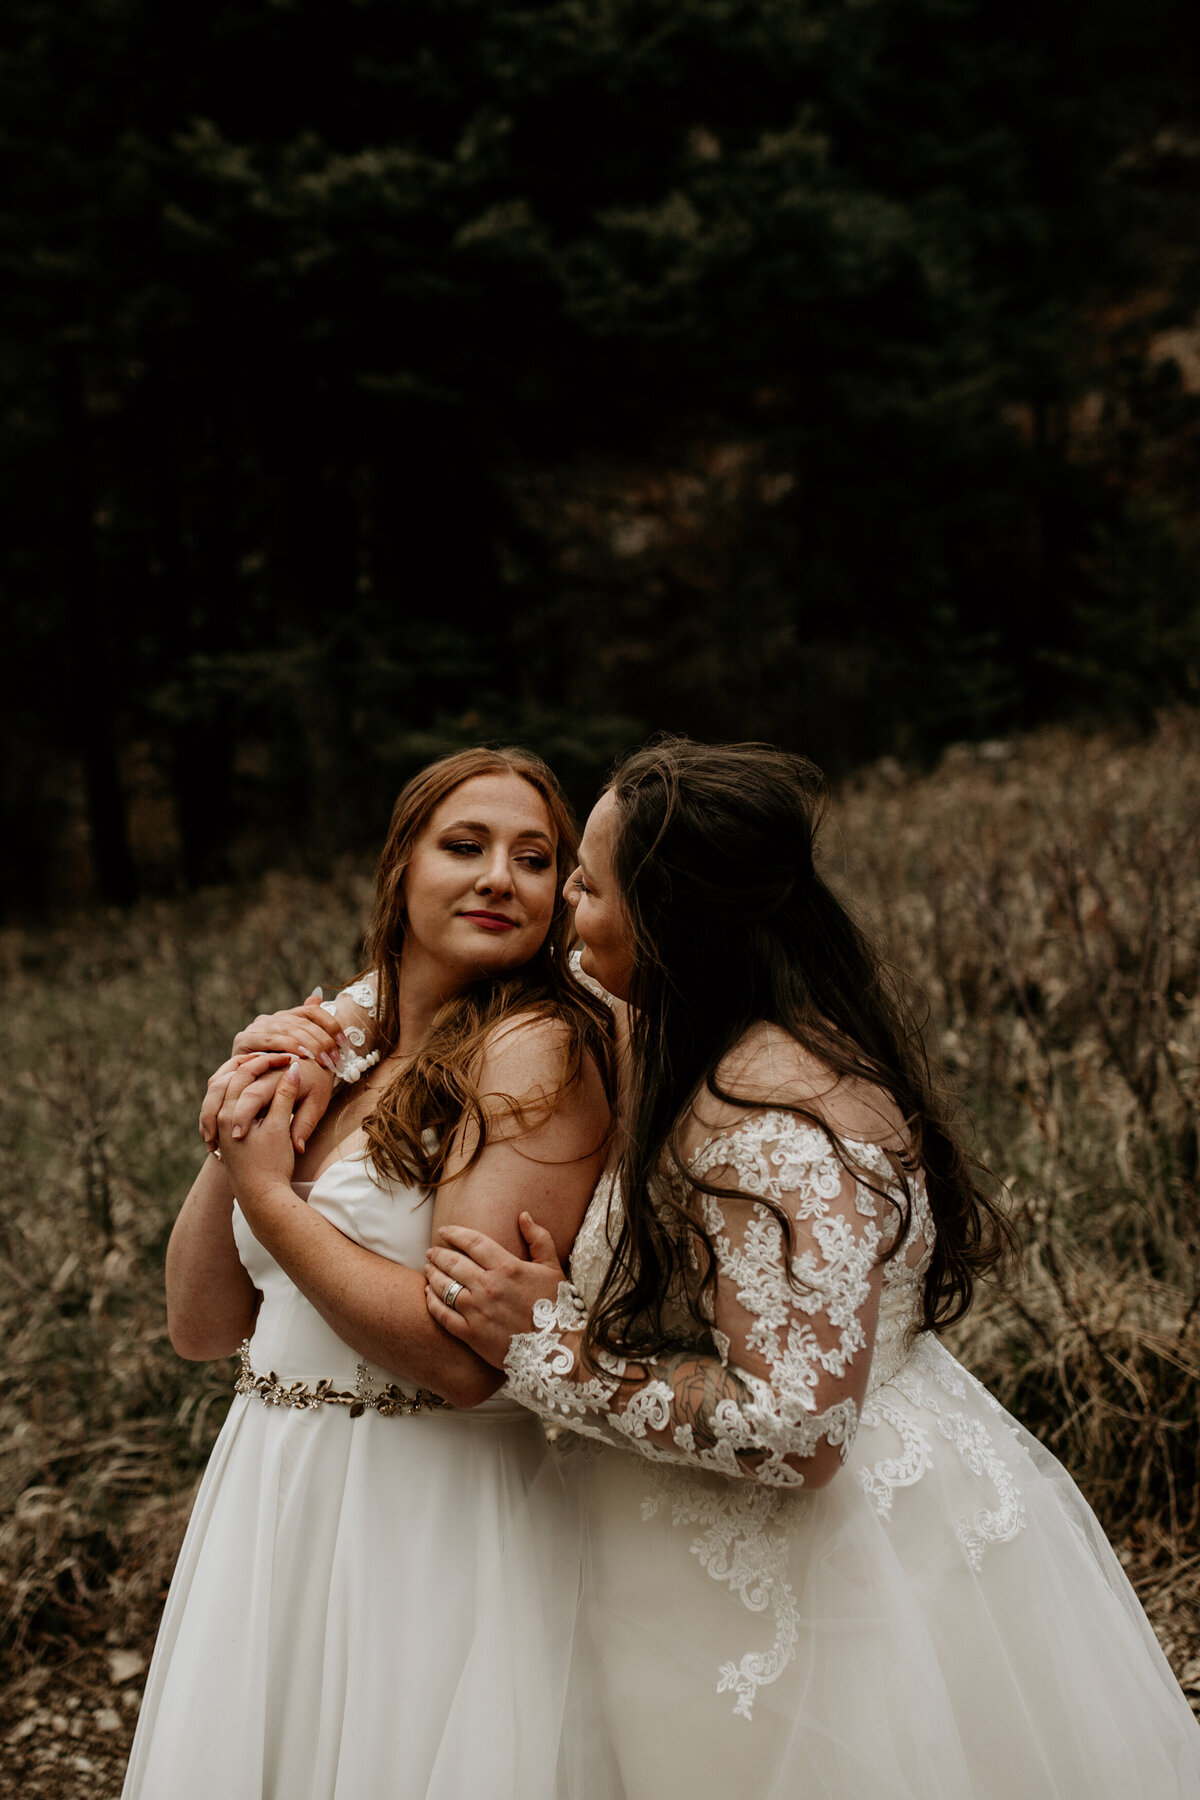 Gallery Taos Ski Valley Elopement picture